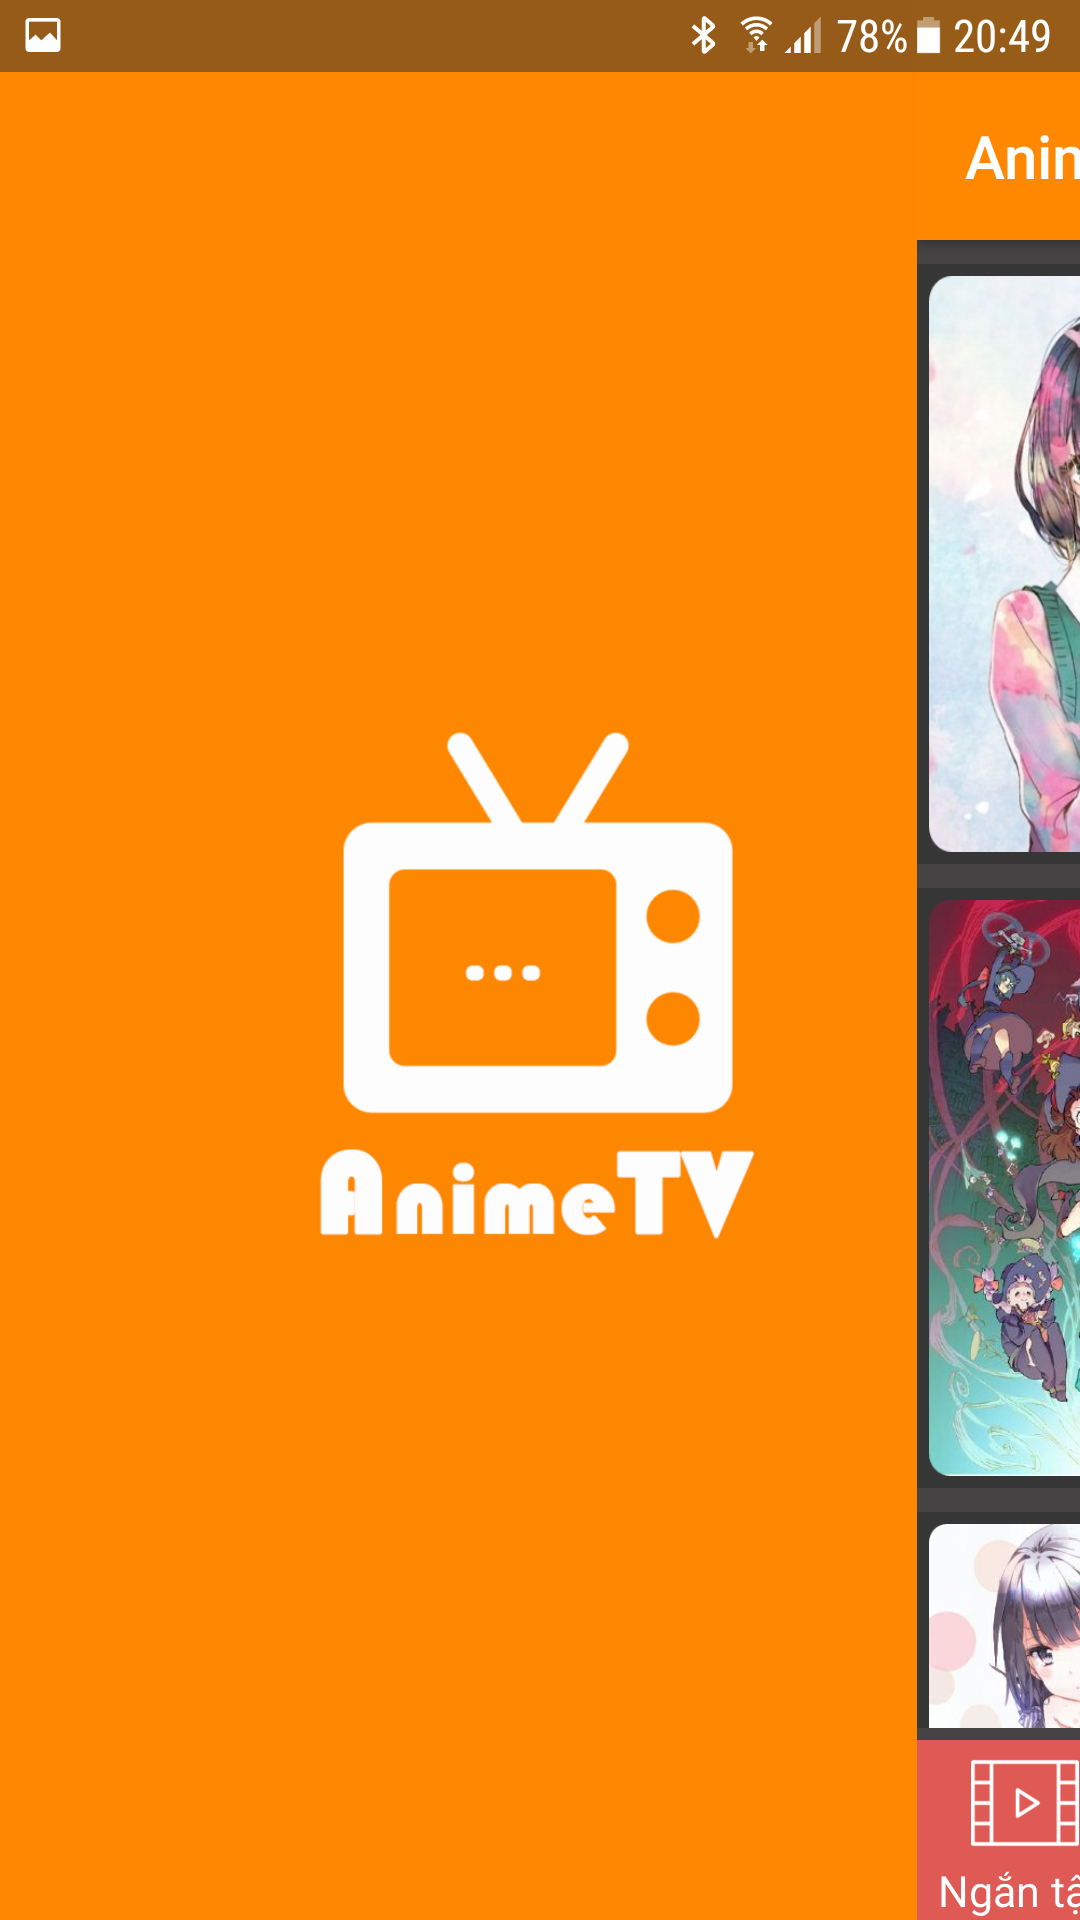 Zo TV - Anime TV APK (Android App) - Free Download